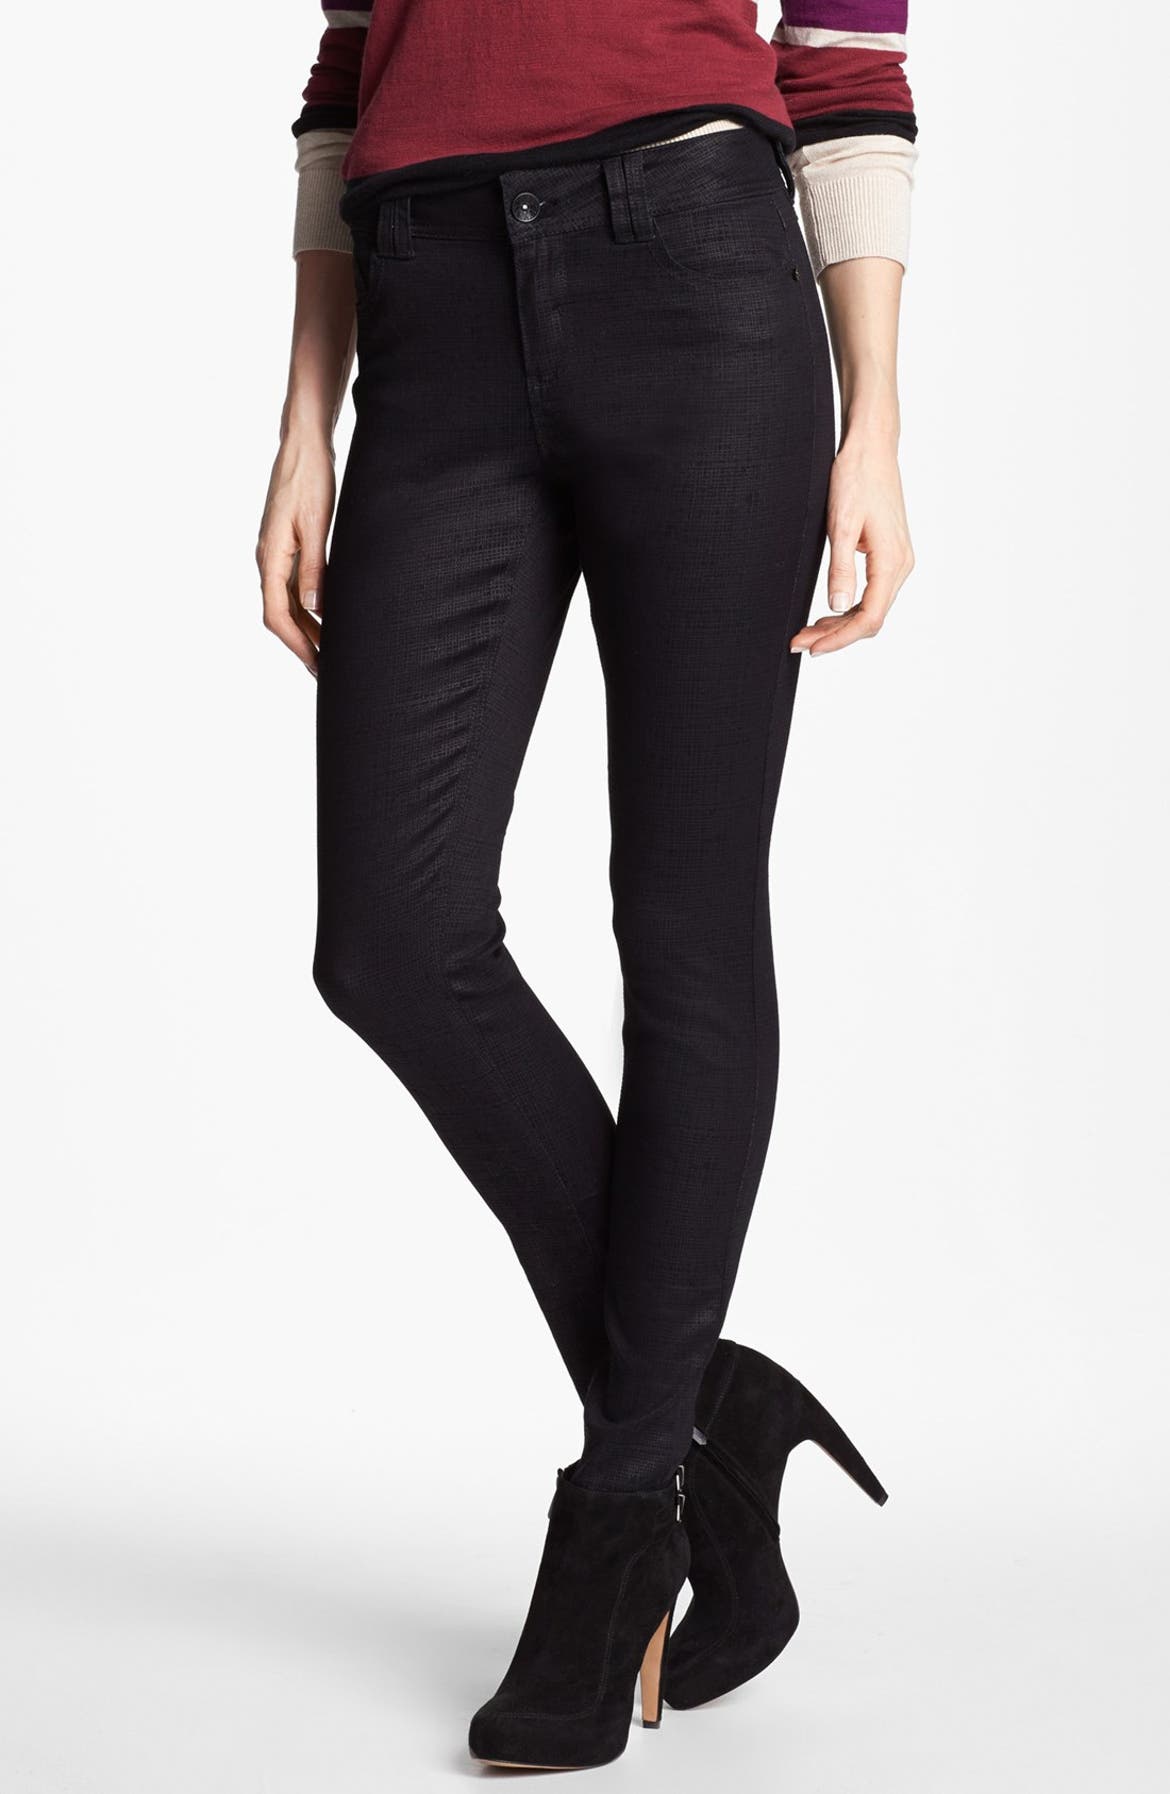 Wit & Wisdom Graphic Coated Skinny Jeans (Black) (Nordstrom Exclusive ...